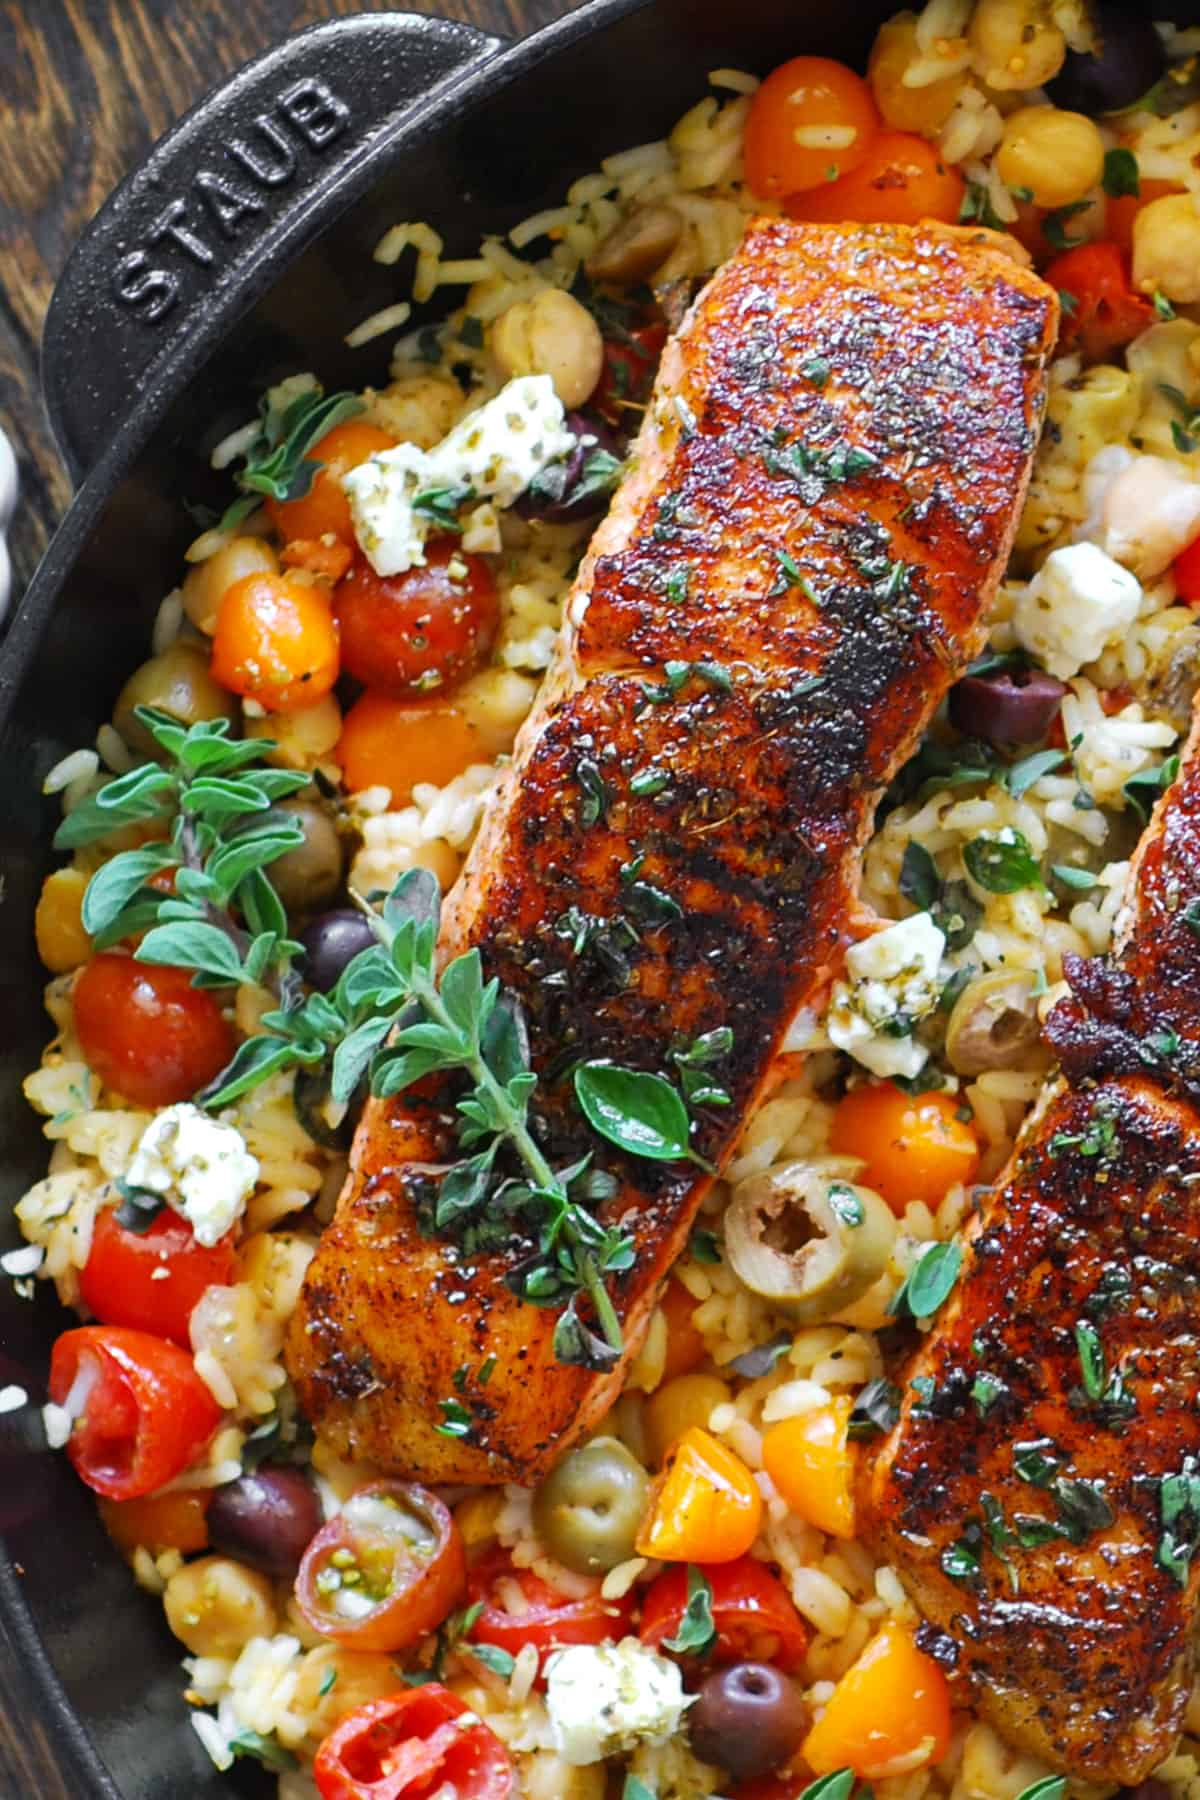 Mediterranean Salmon with Rice, Chickpeas, Cherry Tomatoes, Olives, and Feta Cheese - in a cast iron skillet.